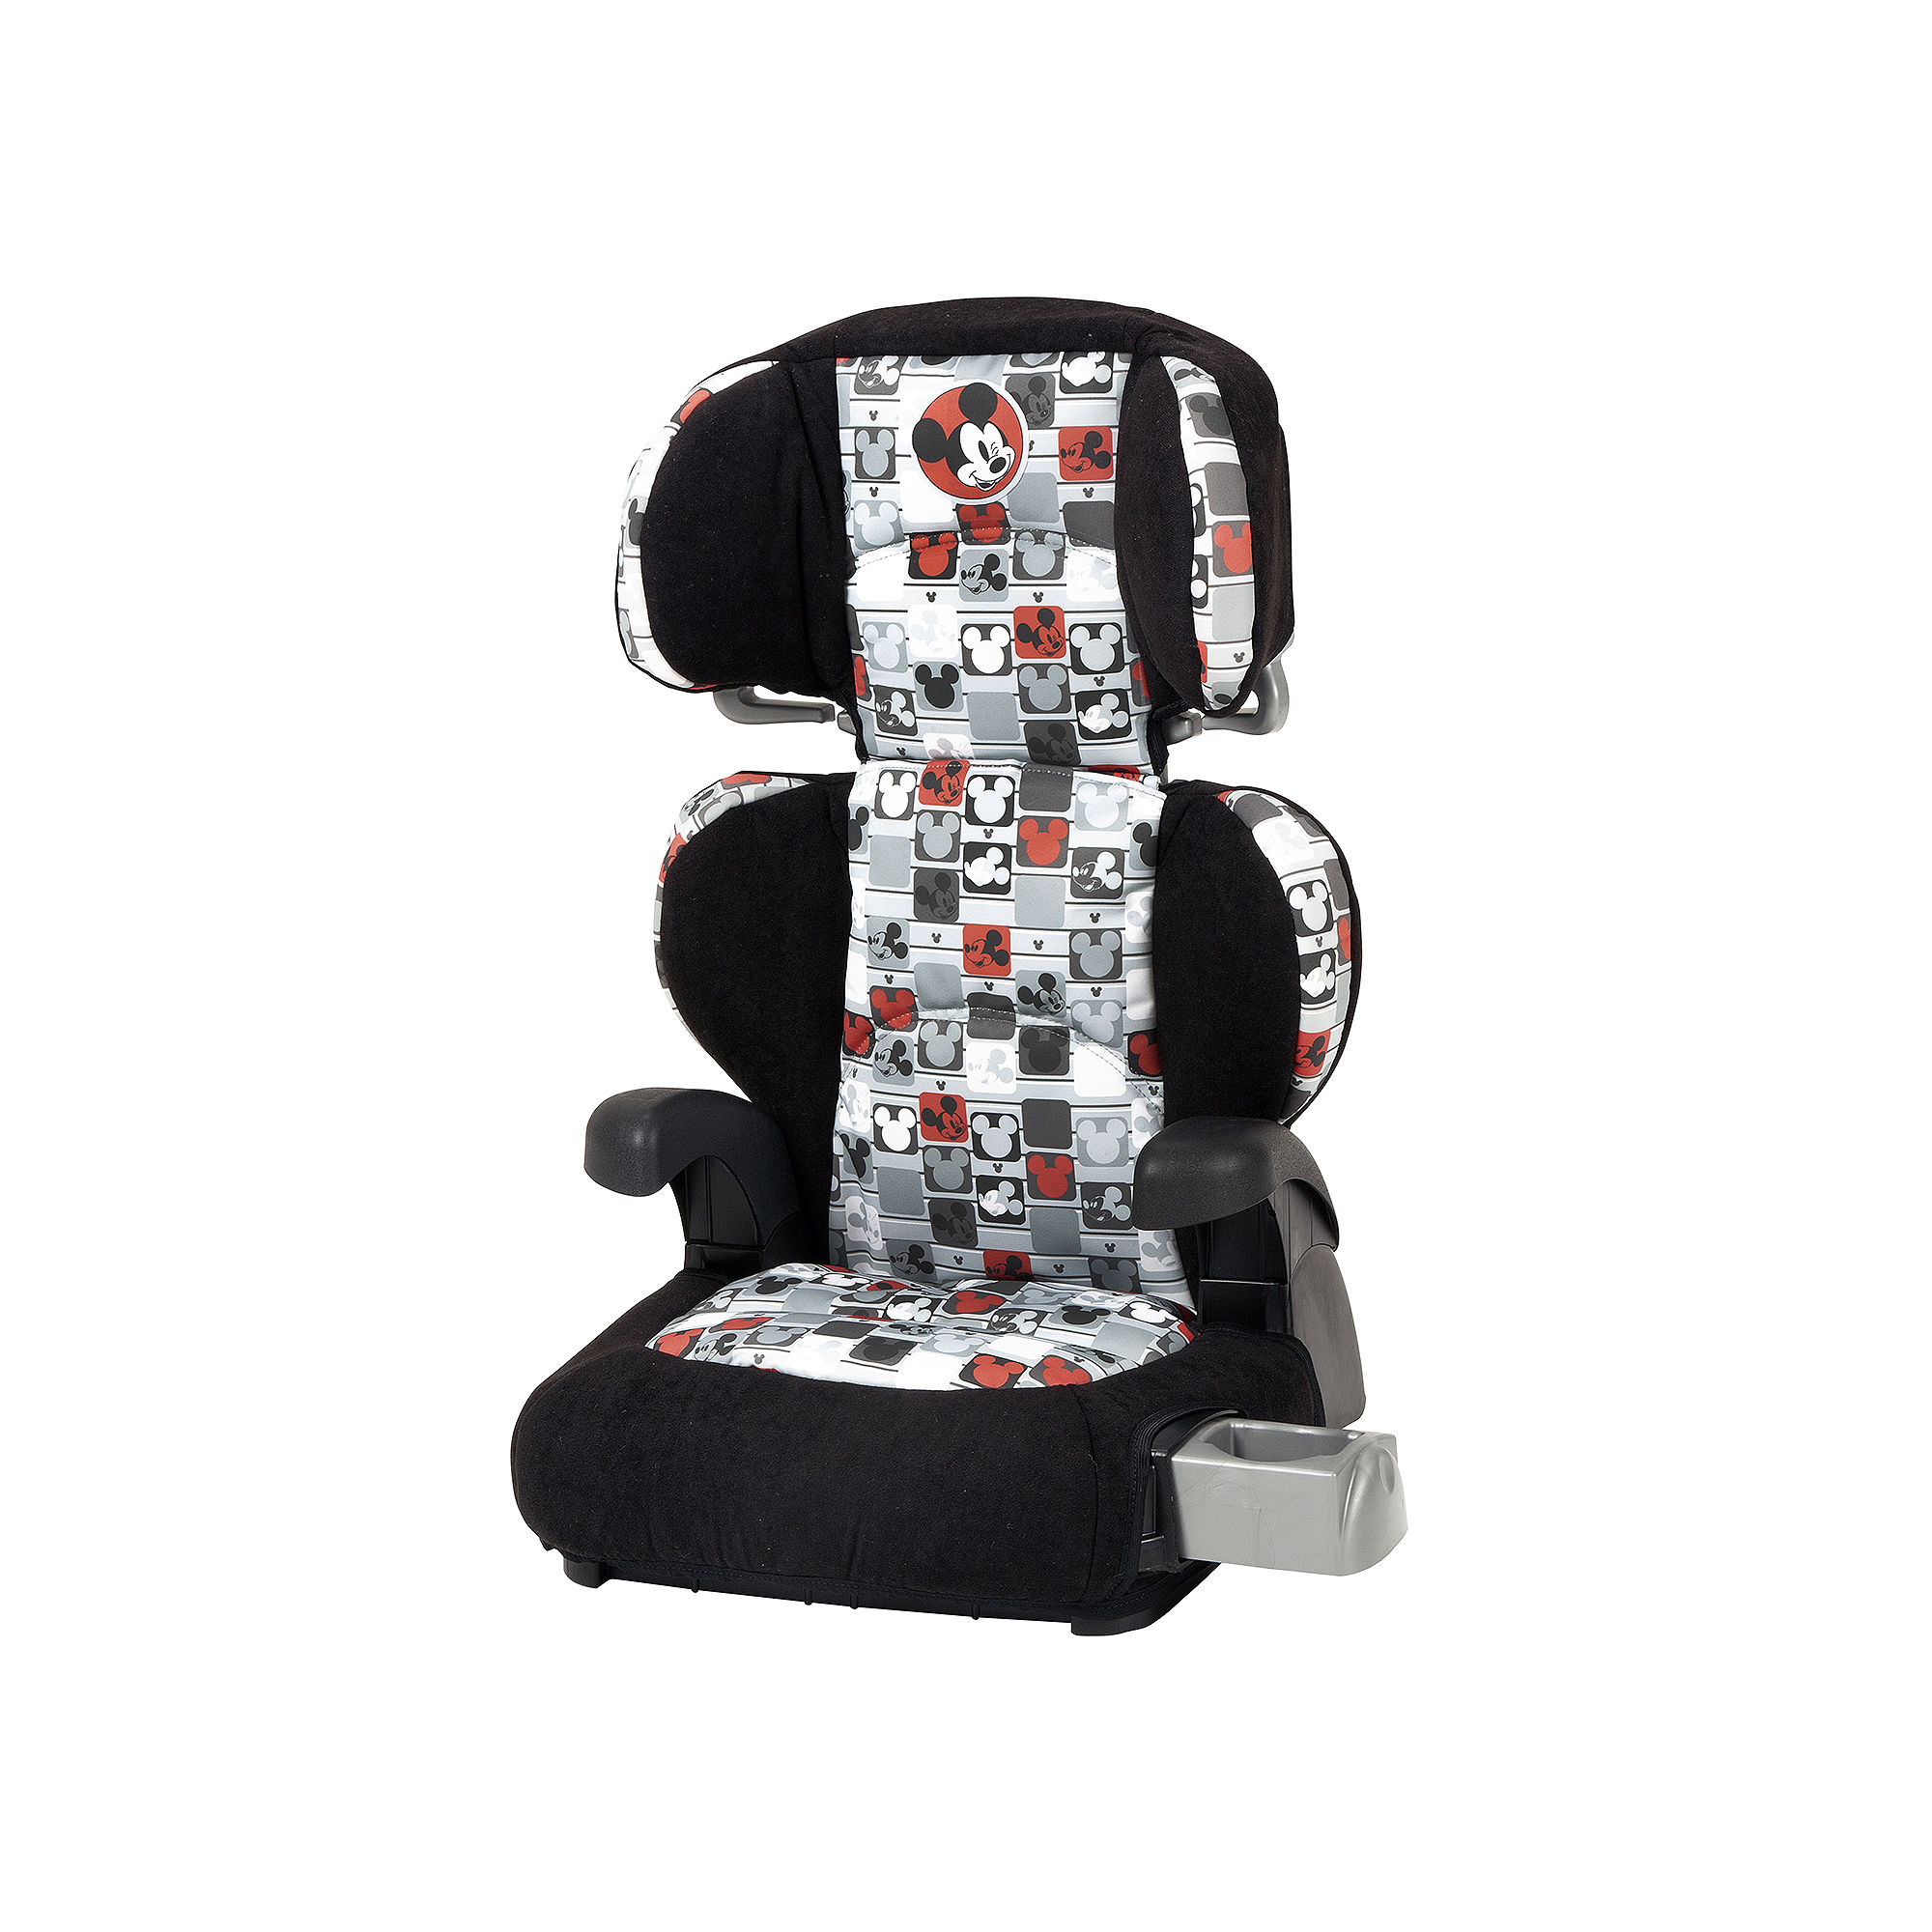 Disney Mickey Mouse Patchwork Booster Car Seat